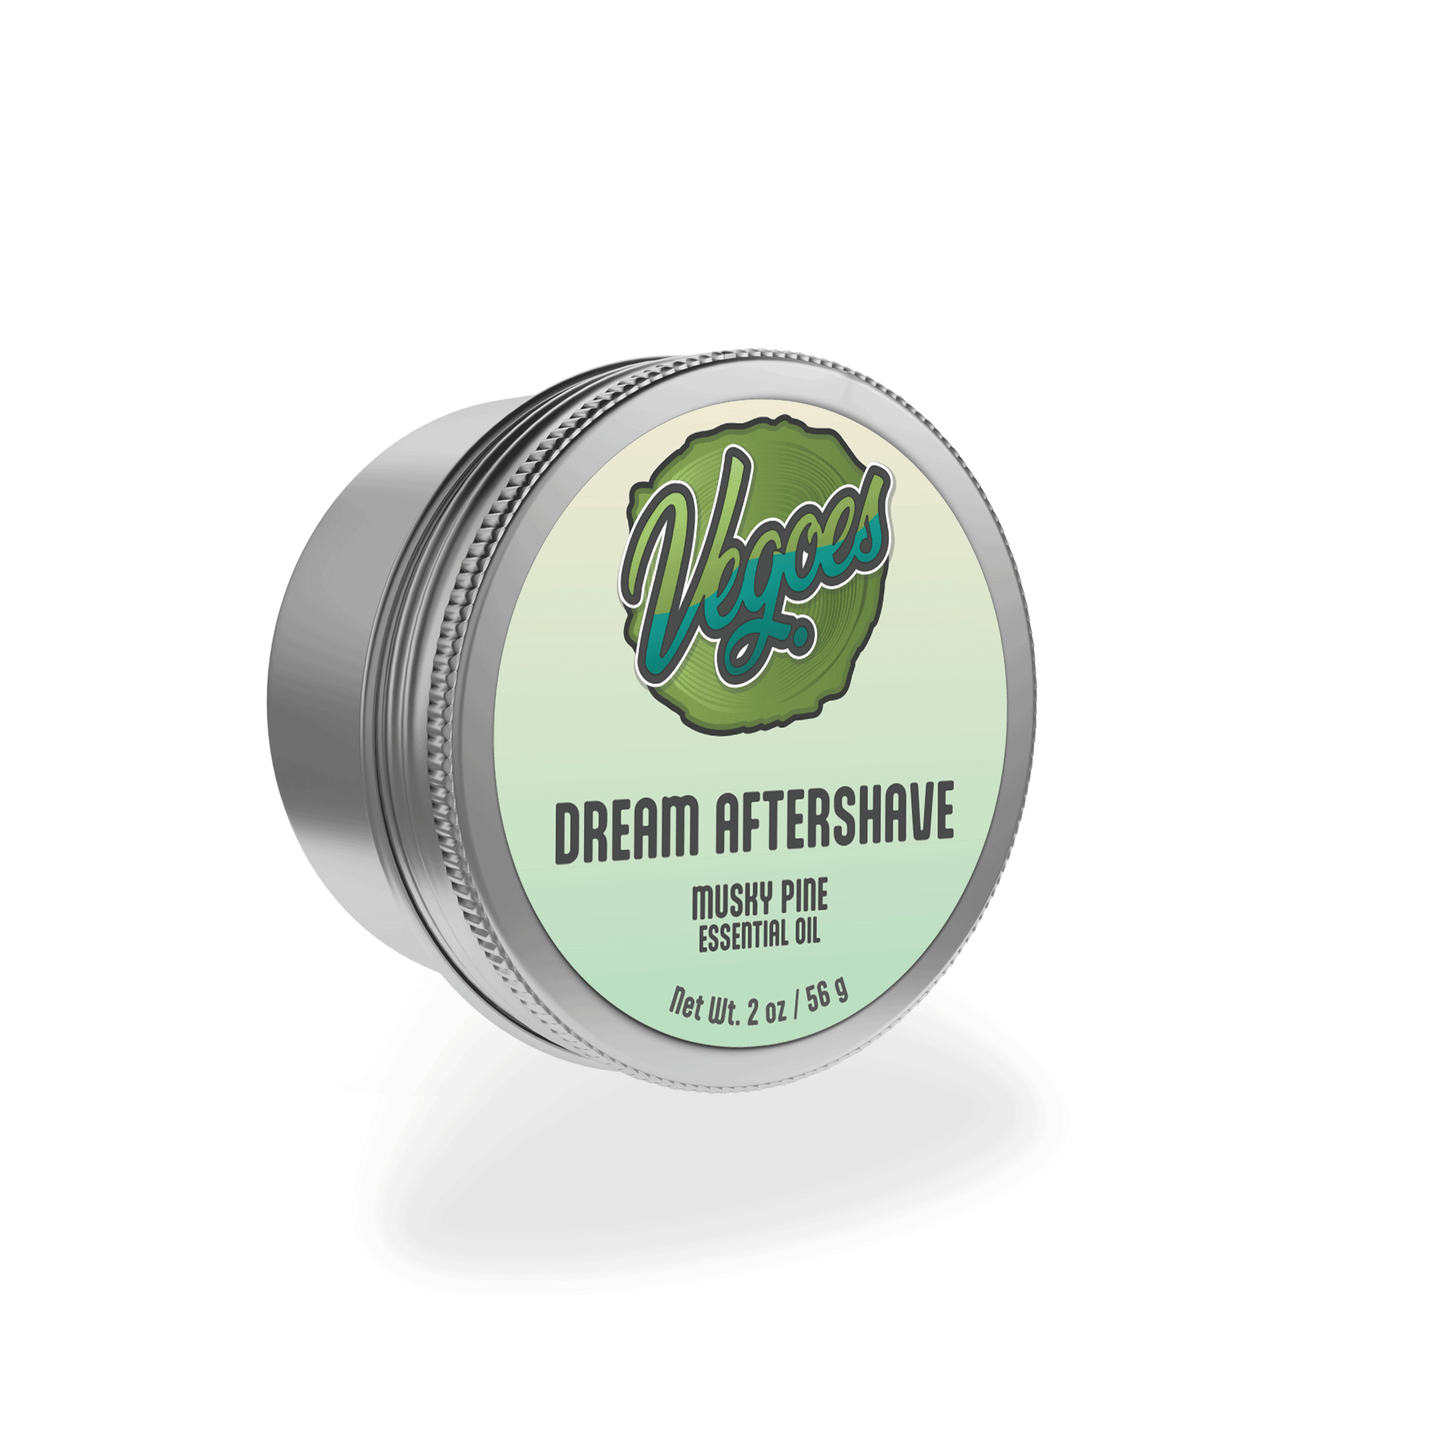 Musky Pine Dream Aftershave